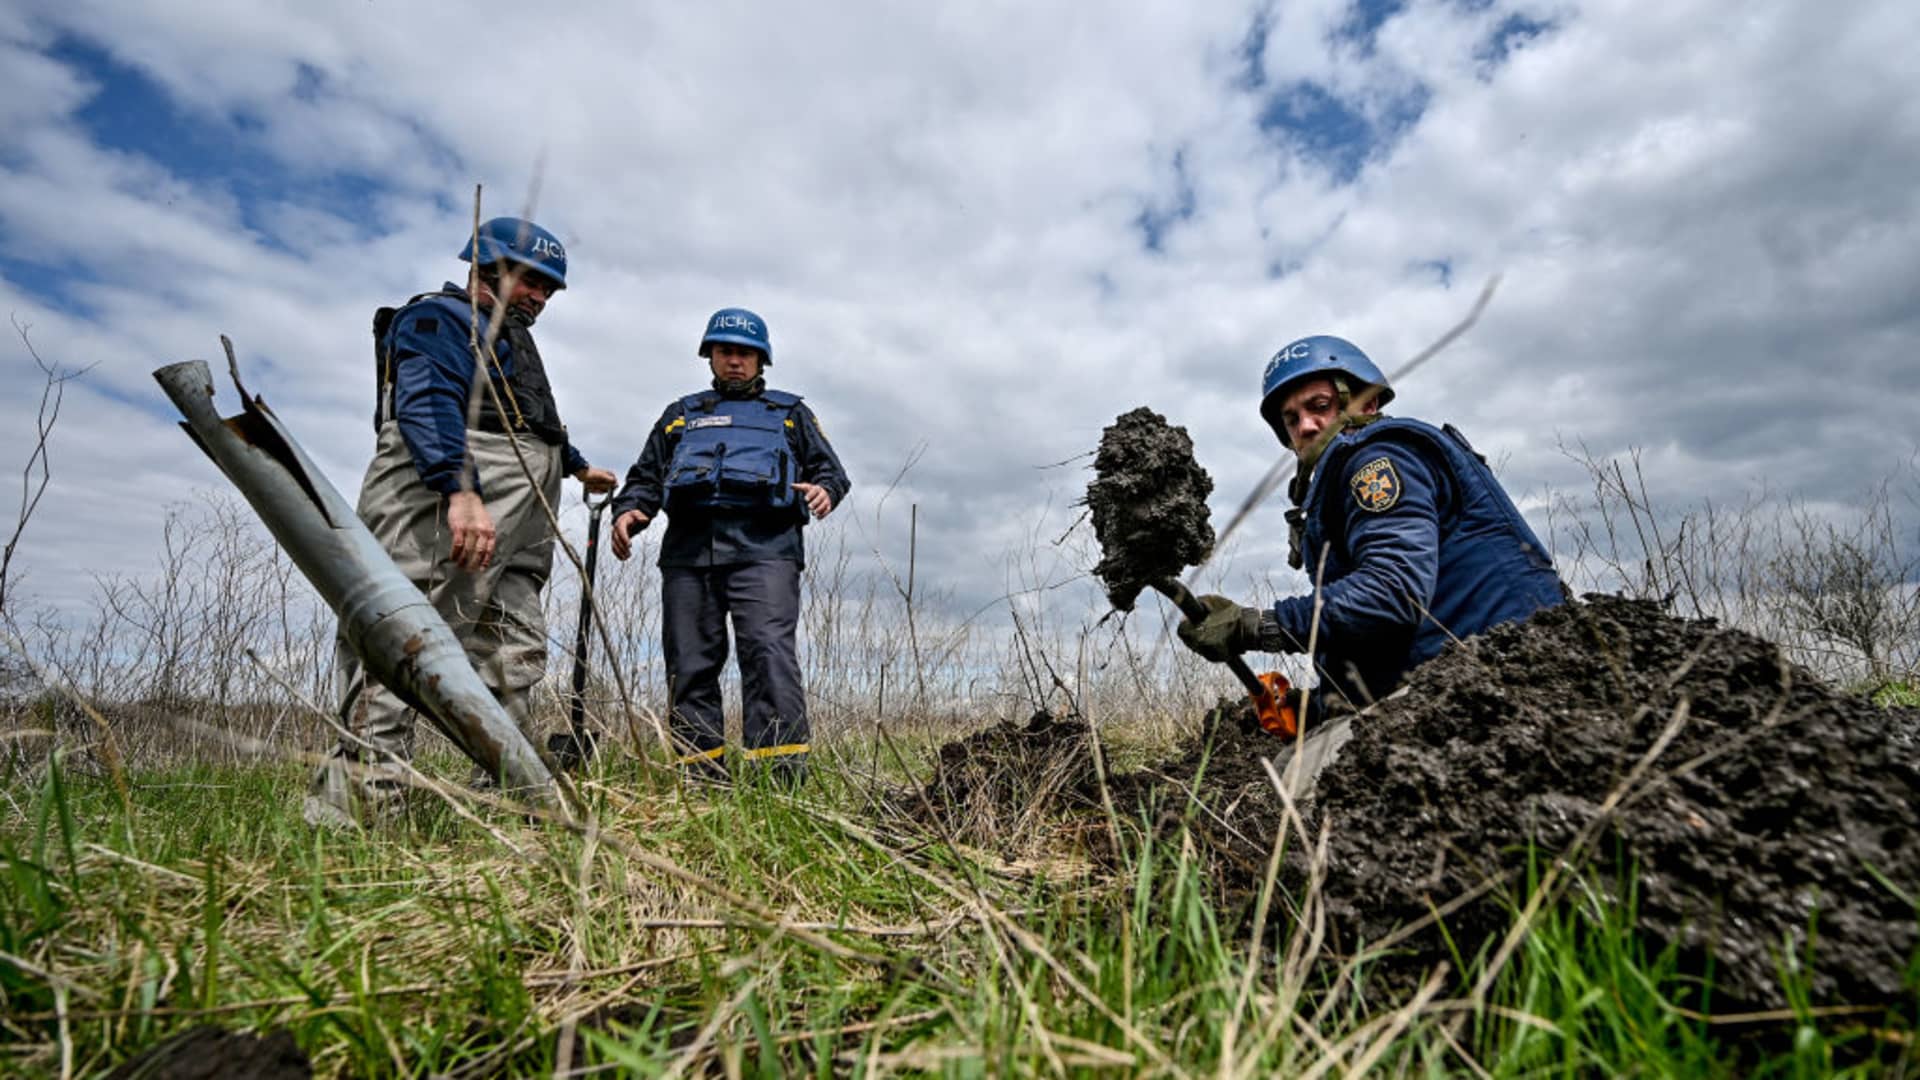 An expert of a State Emergency Service bomb squad digs around the dangerous remains of an Uragan rocket stuck in pastureland during a mine clearance effort, Hryhorivka, Zaporizhzhia Region, southeastern Ukraine.